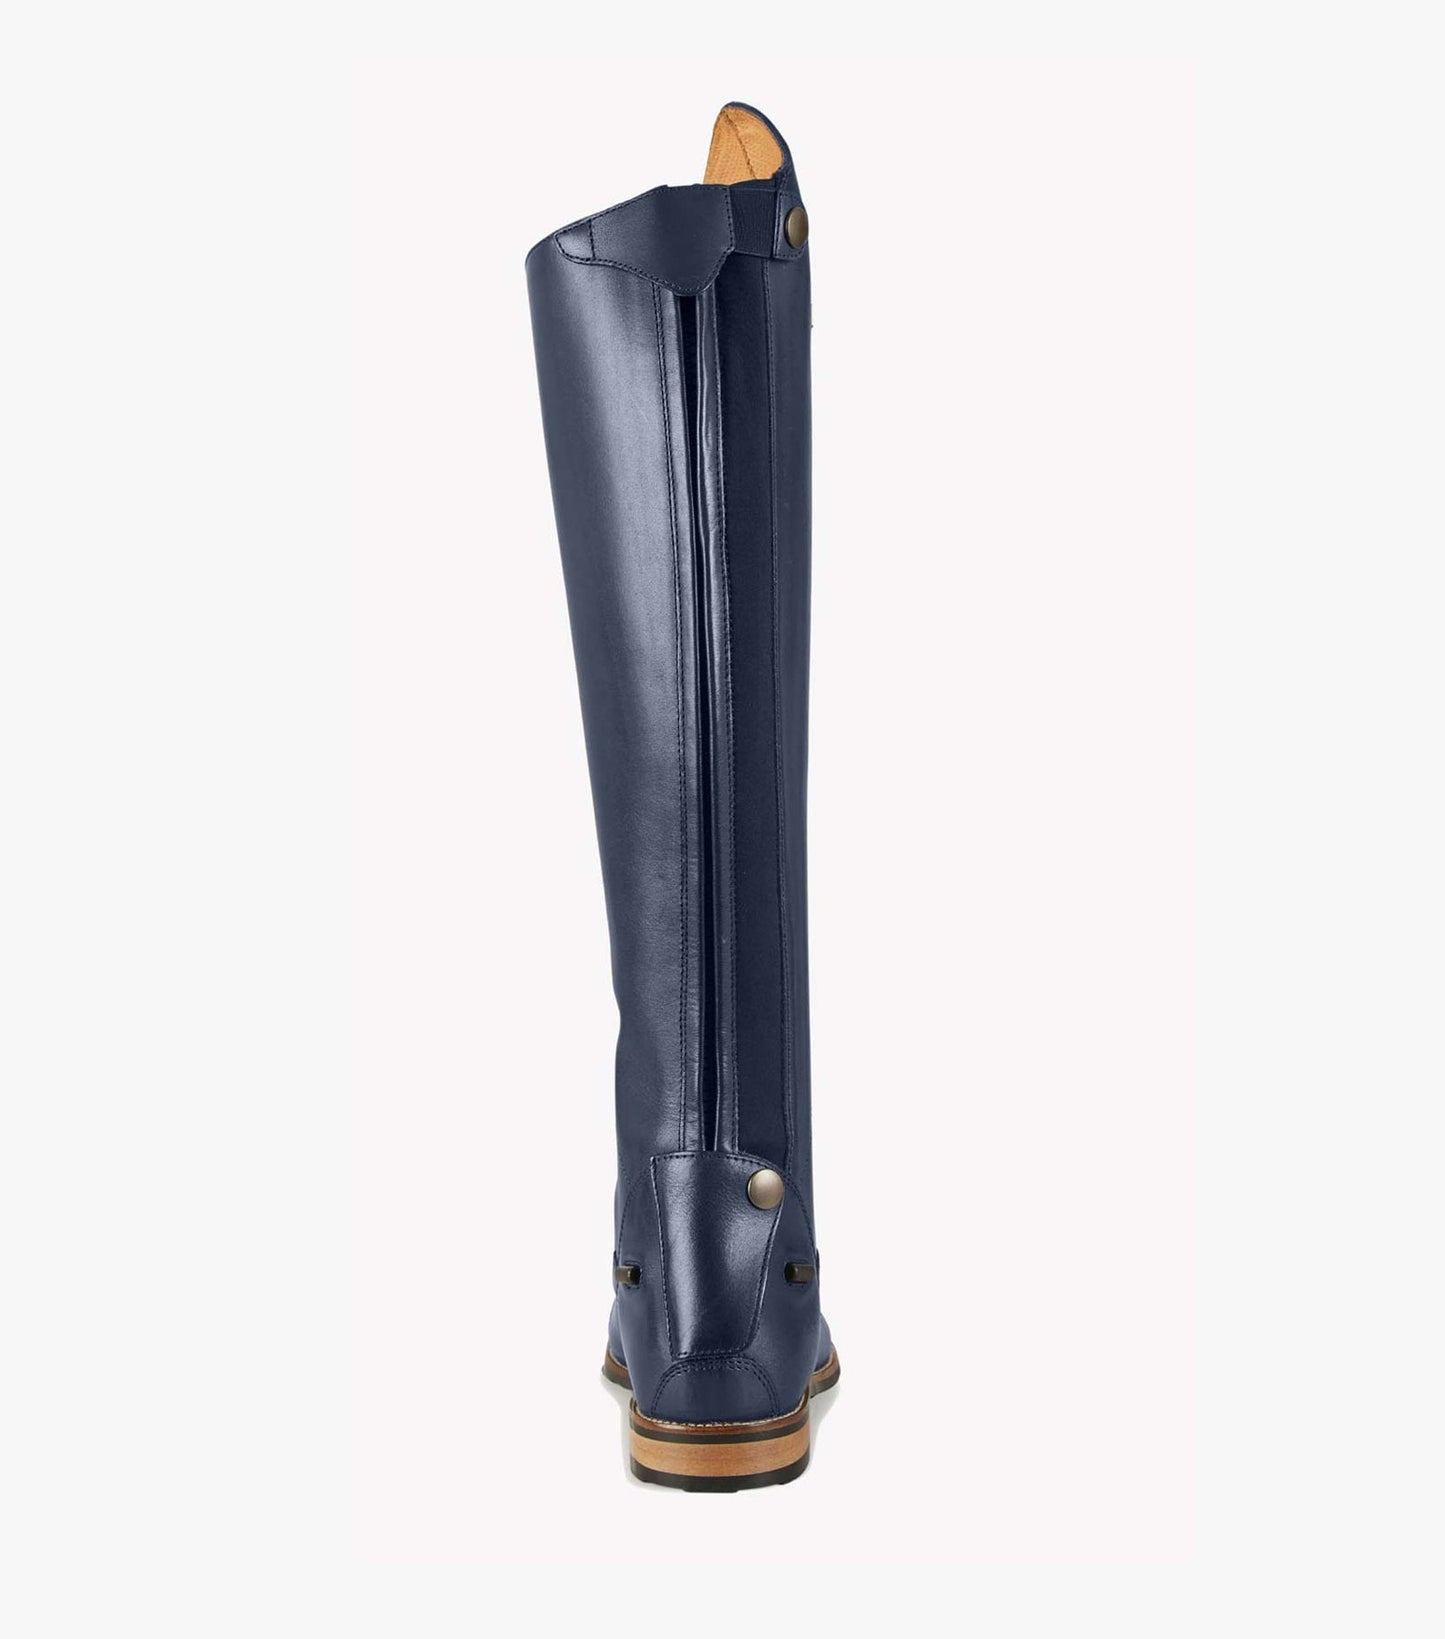 Premier Equine Maurizia Ladies Lace Front Tall Leather Riding Boots - Navy